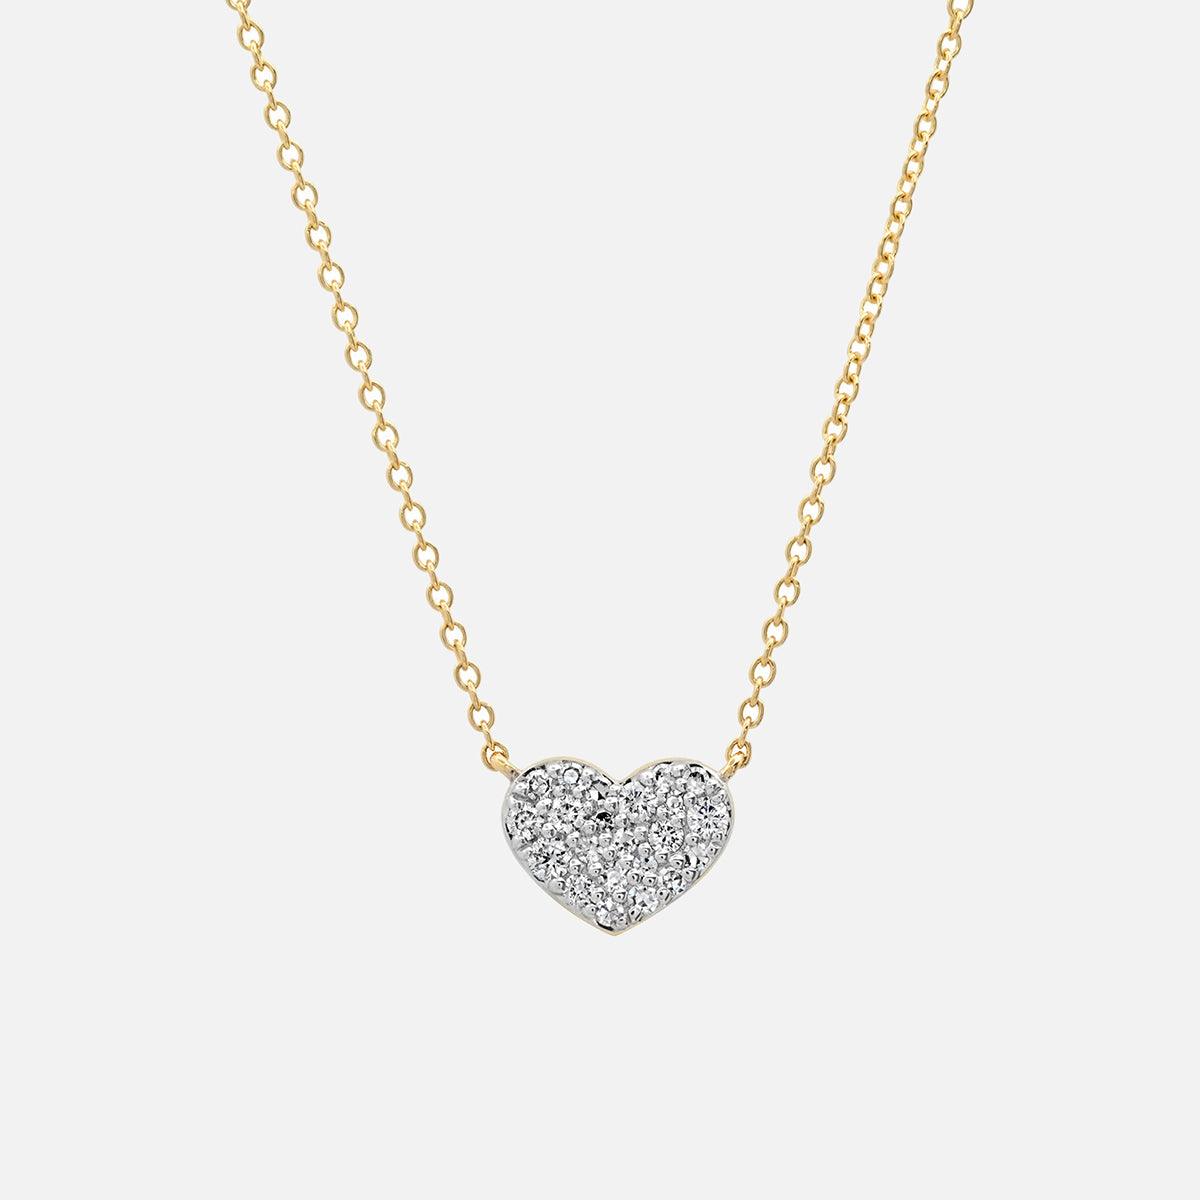 Diamond Smushed Heart Necklace - At Present